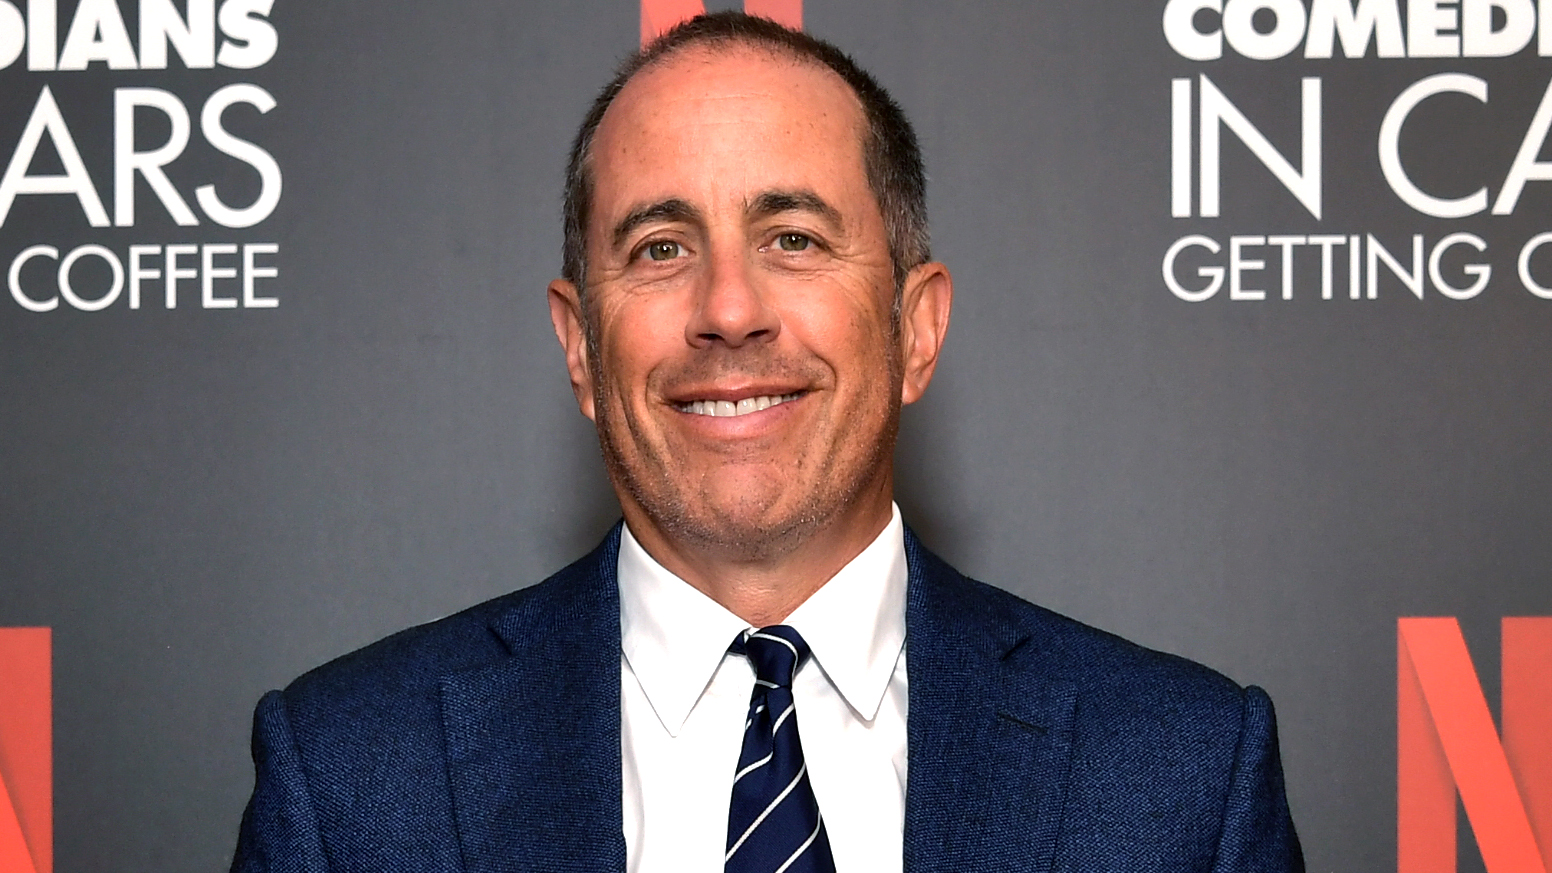 Jerry Seinfeld Criticizes the Impact of the Extreme Left on TV Comedy